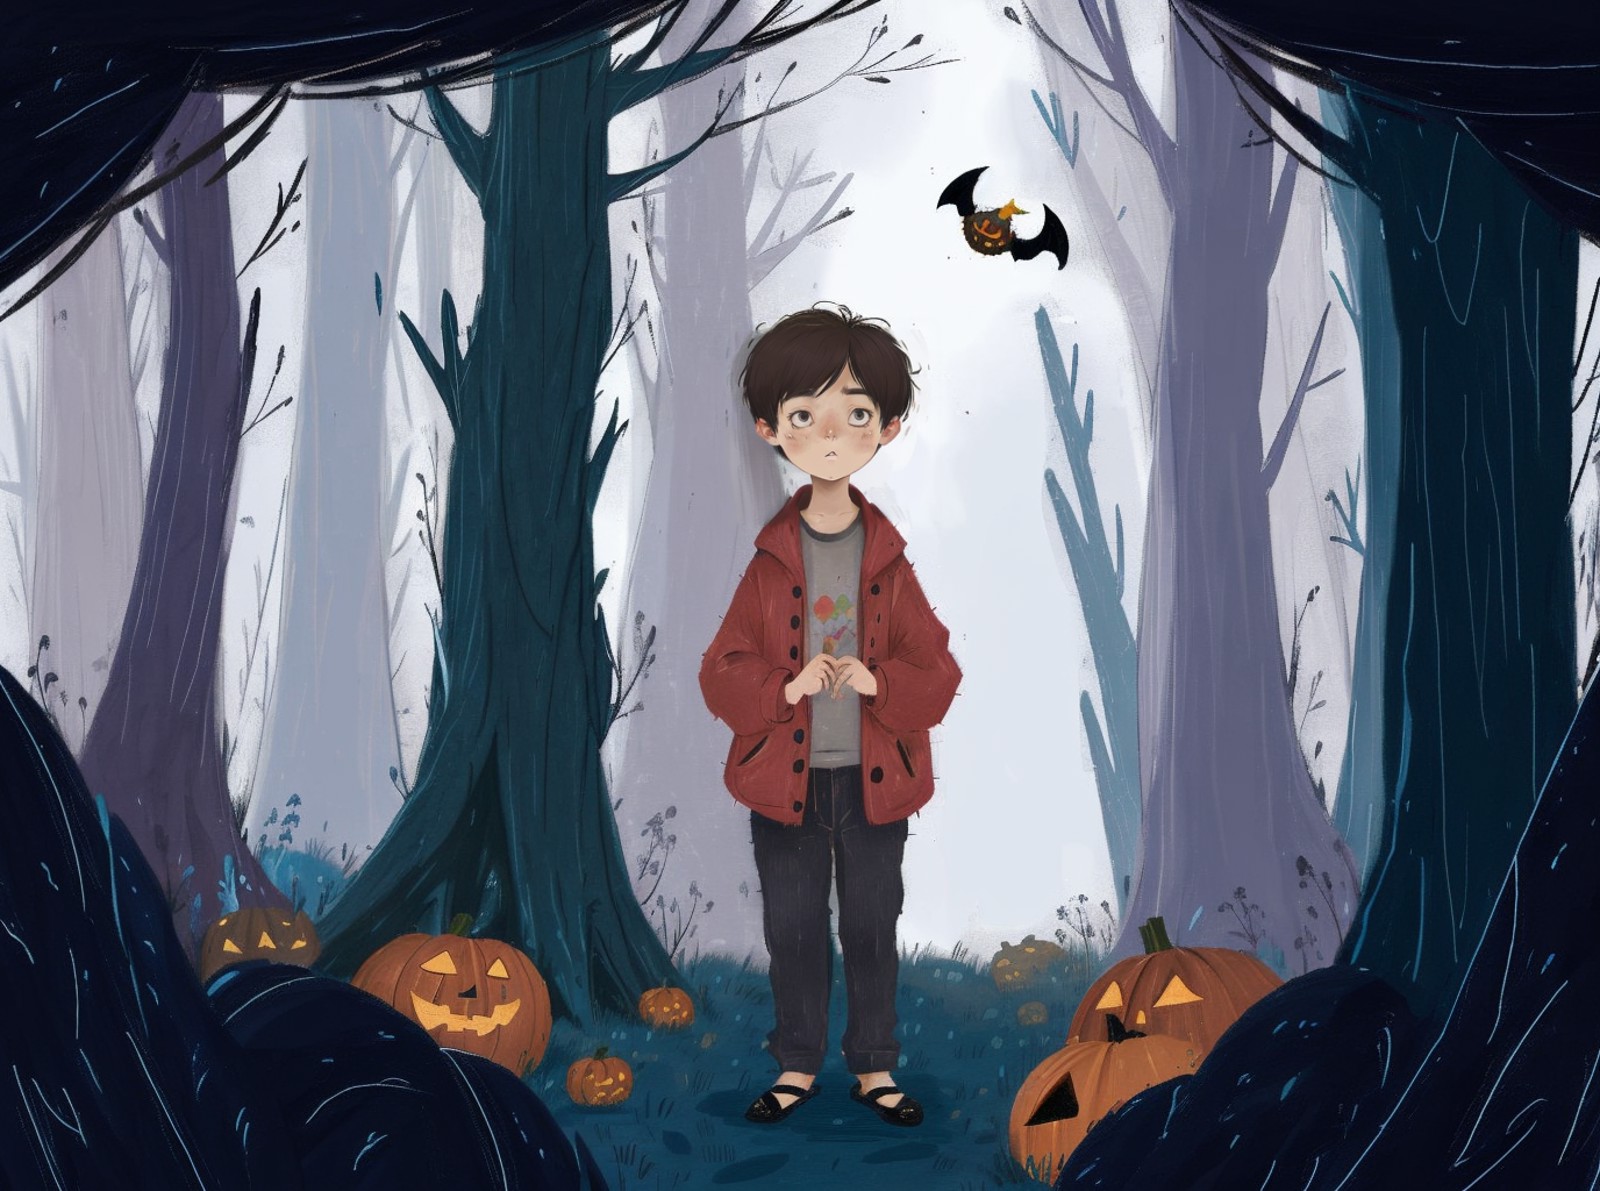 03902-3620791468-best quality,masterpiece,ultra high res,childpaiting,((1boy)),solo,crayon drawing,_night,outdoors,surreal,halloween,bat,terrible.png